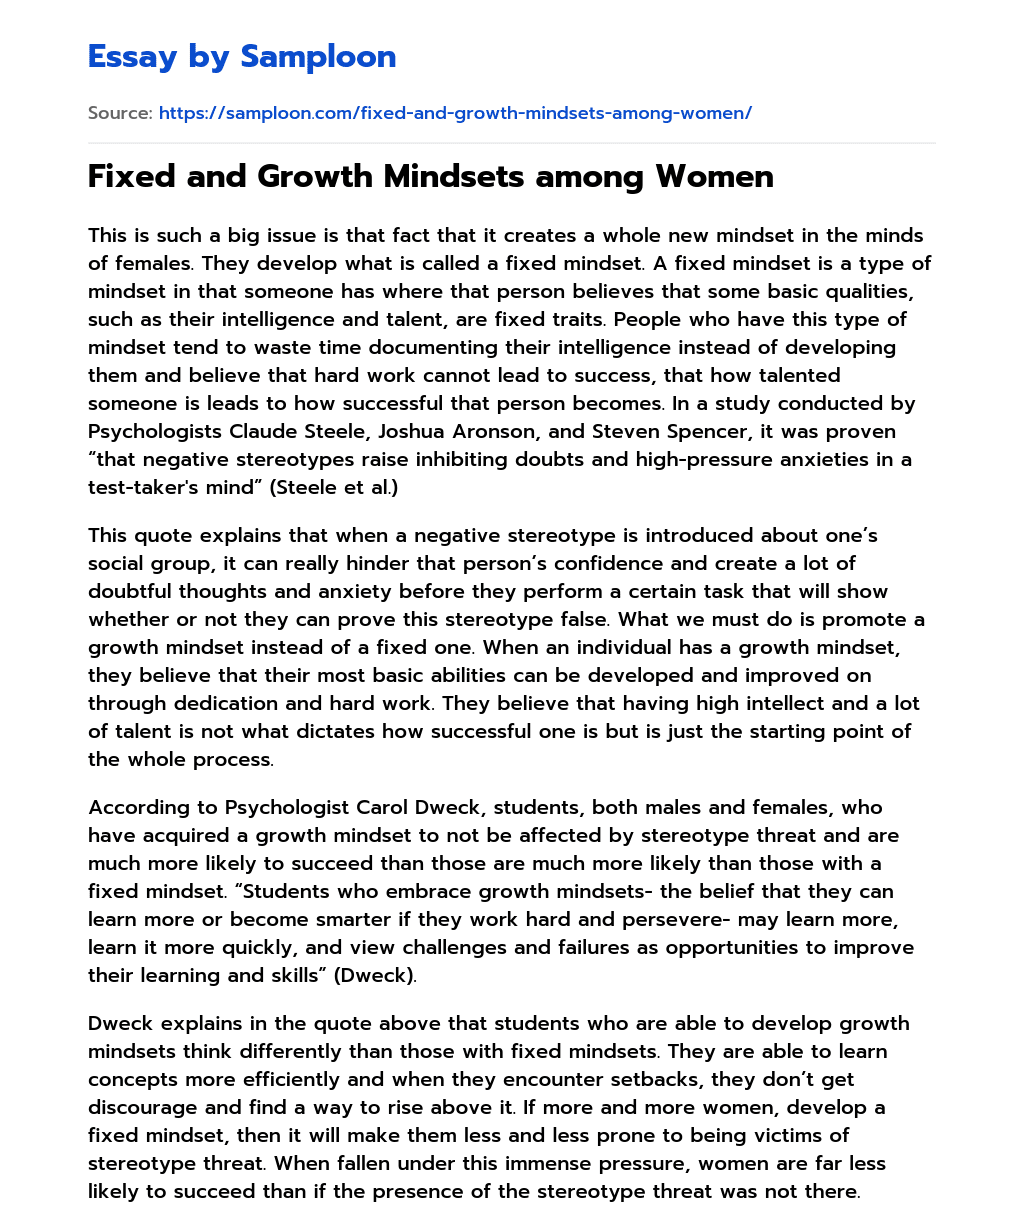 Fixed and Growth Mindsets among Women essay